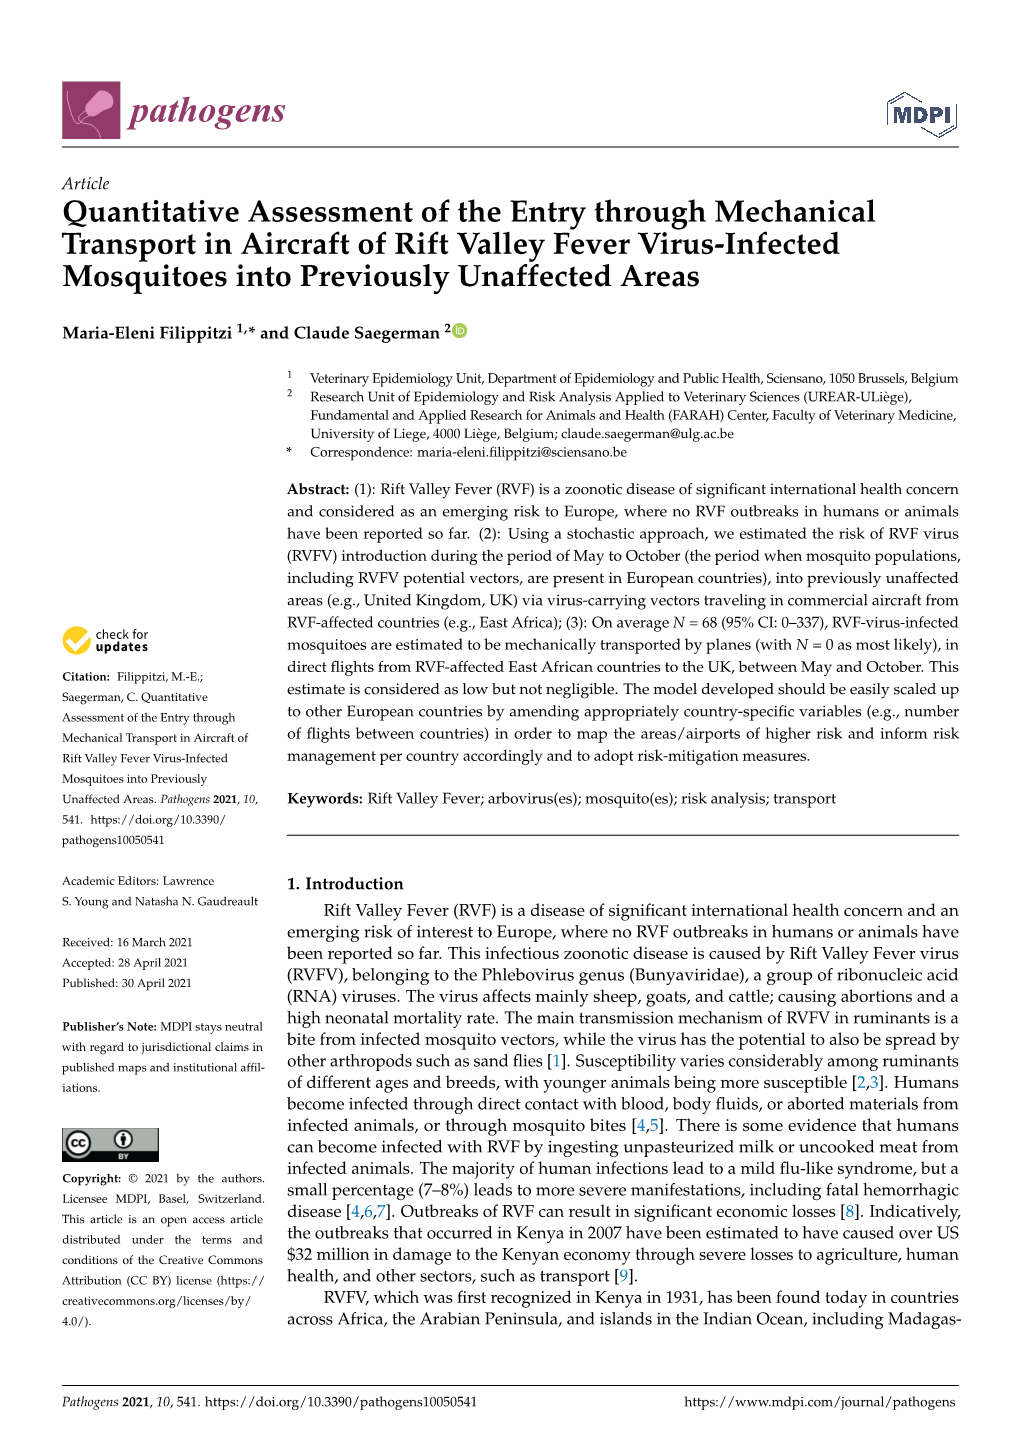 Quantitative Assessment of the Entry Through Mechanical Transport in Aircraft of Rift Valley Fever Virus-Infected Mosquitoes Into Previously Unaffected Areas